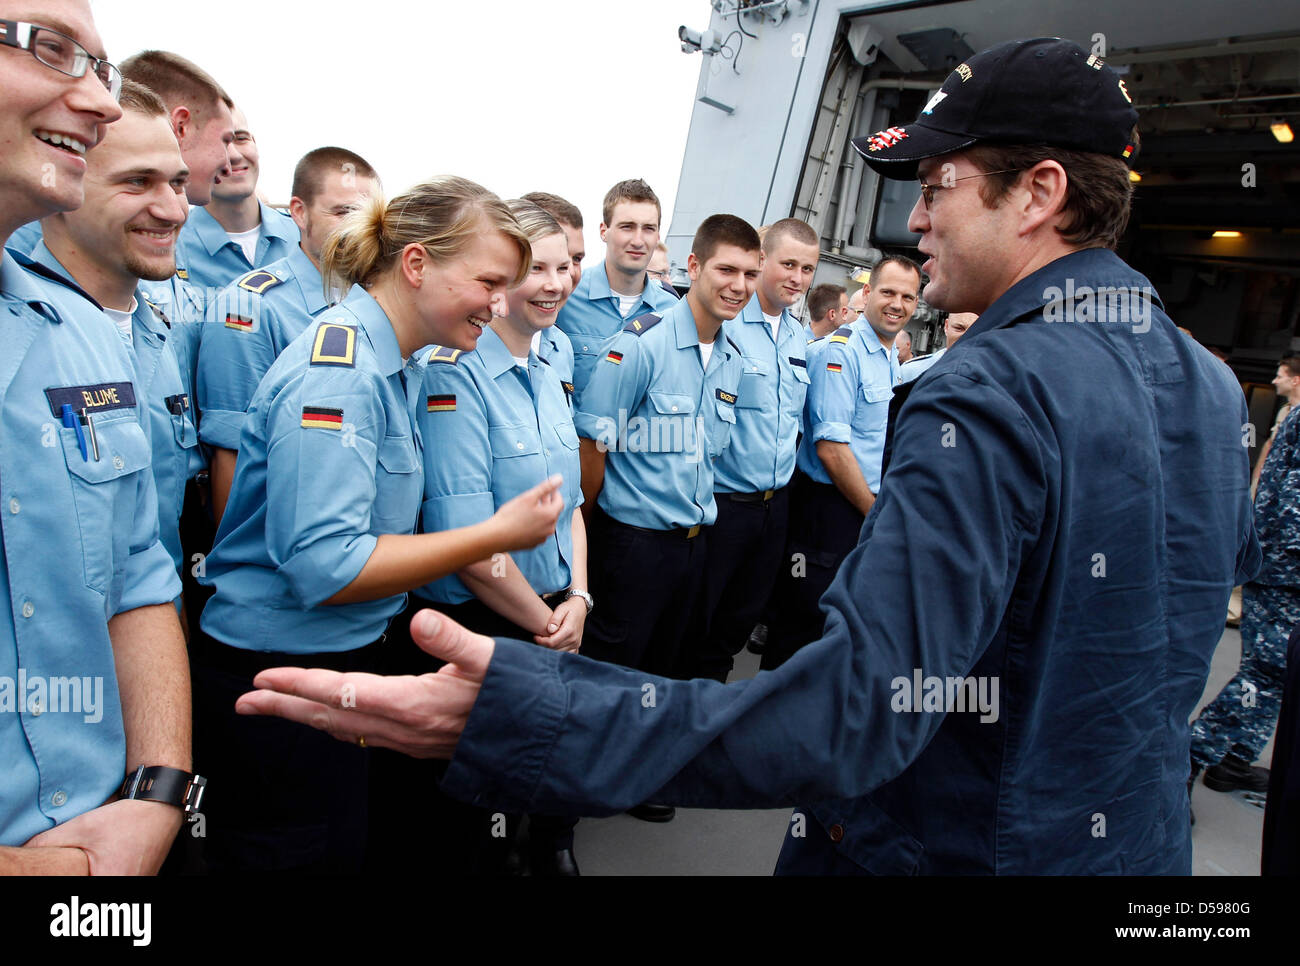 German Defence Minister Karl-Theodor zu Guttenberg (R) talks to German Navy sailors during a visit of the German Navy frigate 'Hessen' at an undisclosed position in the Mediterranean Sea south of Sicily, 14 June 2010. Zu Guttenberg also visited the US aircraft carrier Harry S. Truman which is accompanied by the German frigate in a convoy. Photo: FABRIZIO BENSCH Stock Photo